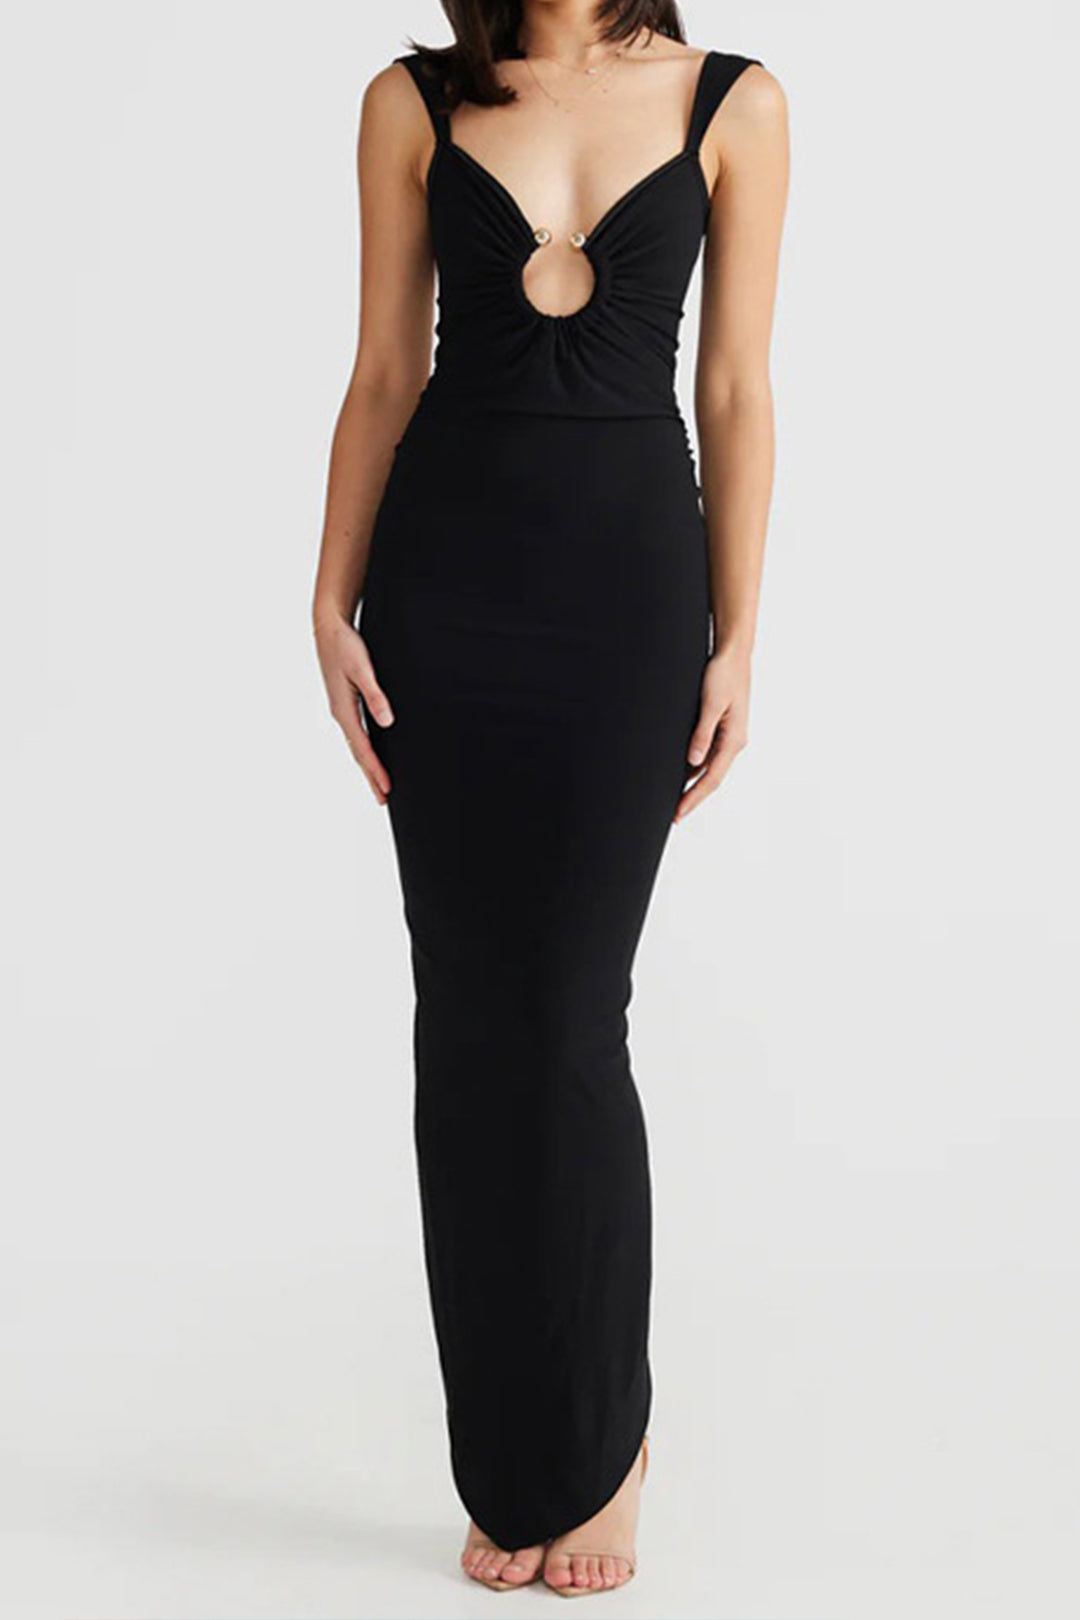 Ruched Cut Out Backless Slit Slip Maxi Dress